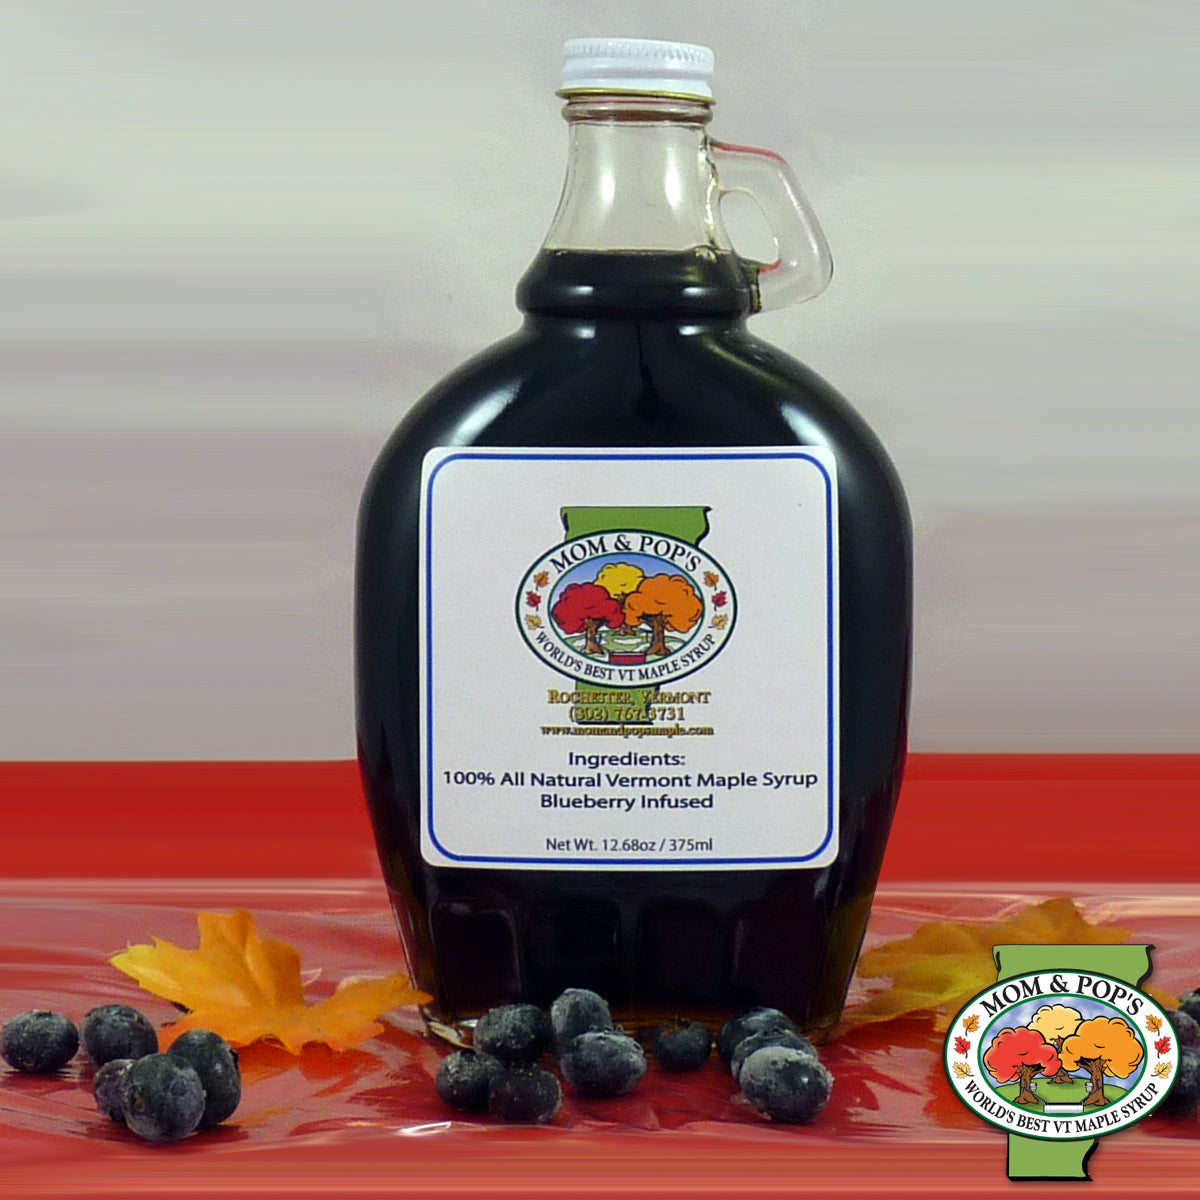 A bottle of Blueberry Infused Maple Syrup